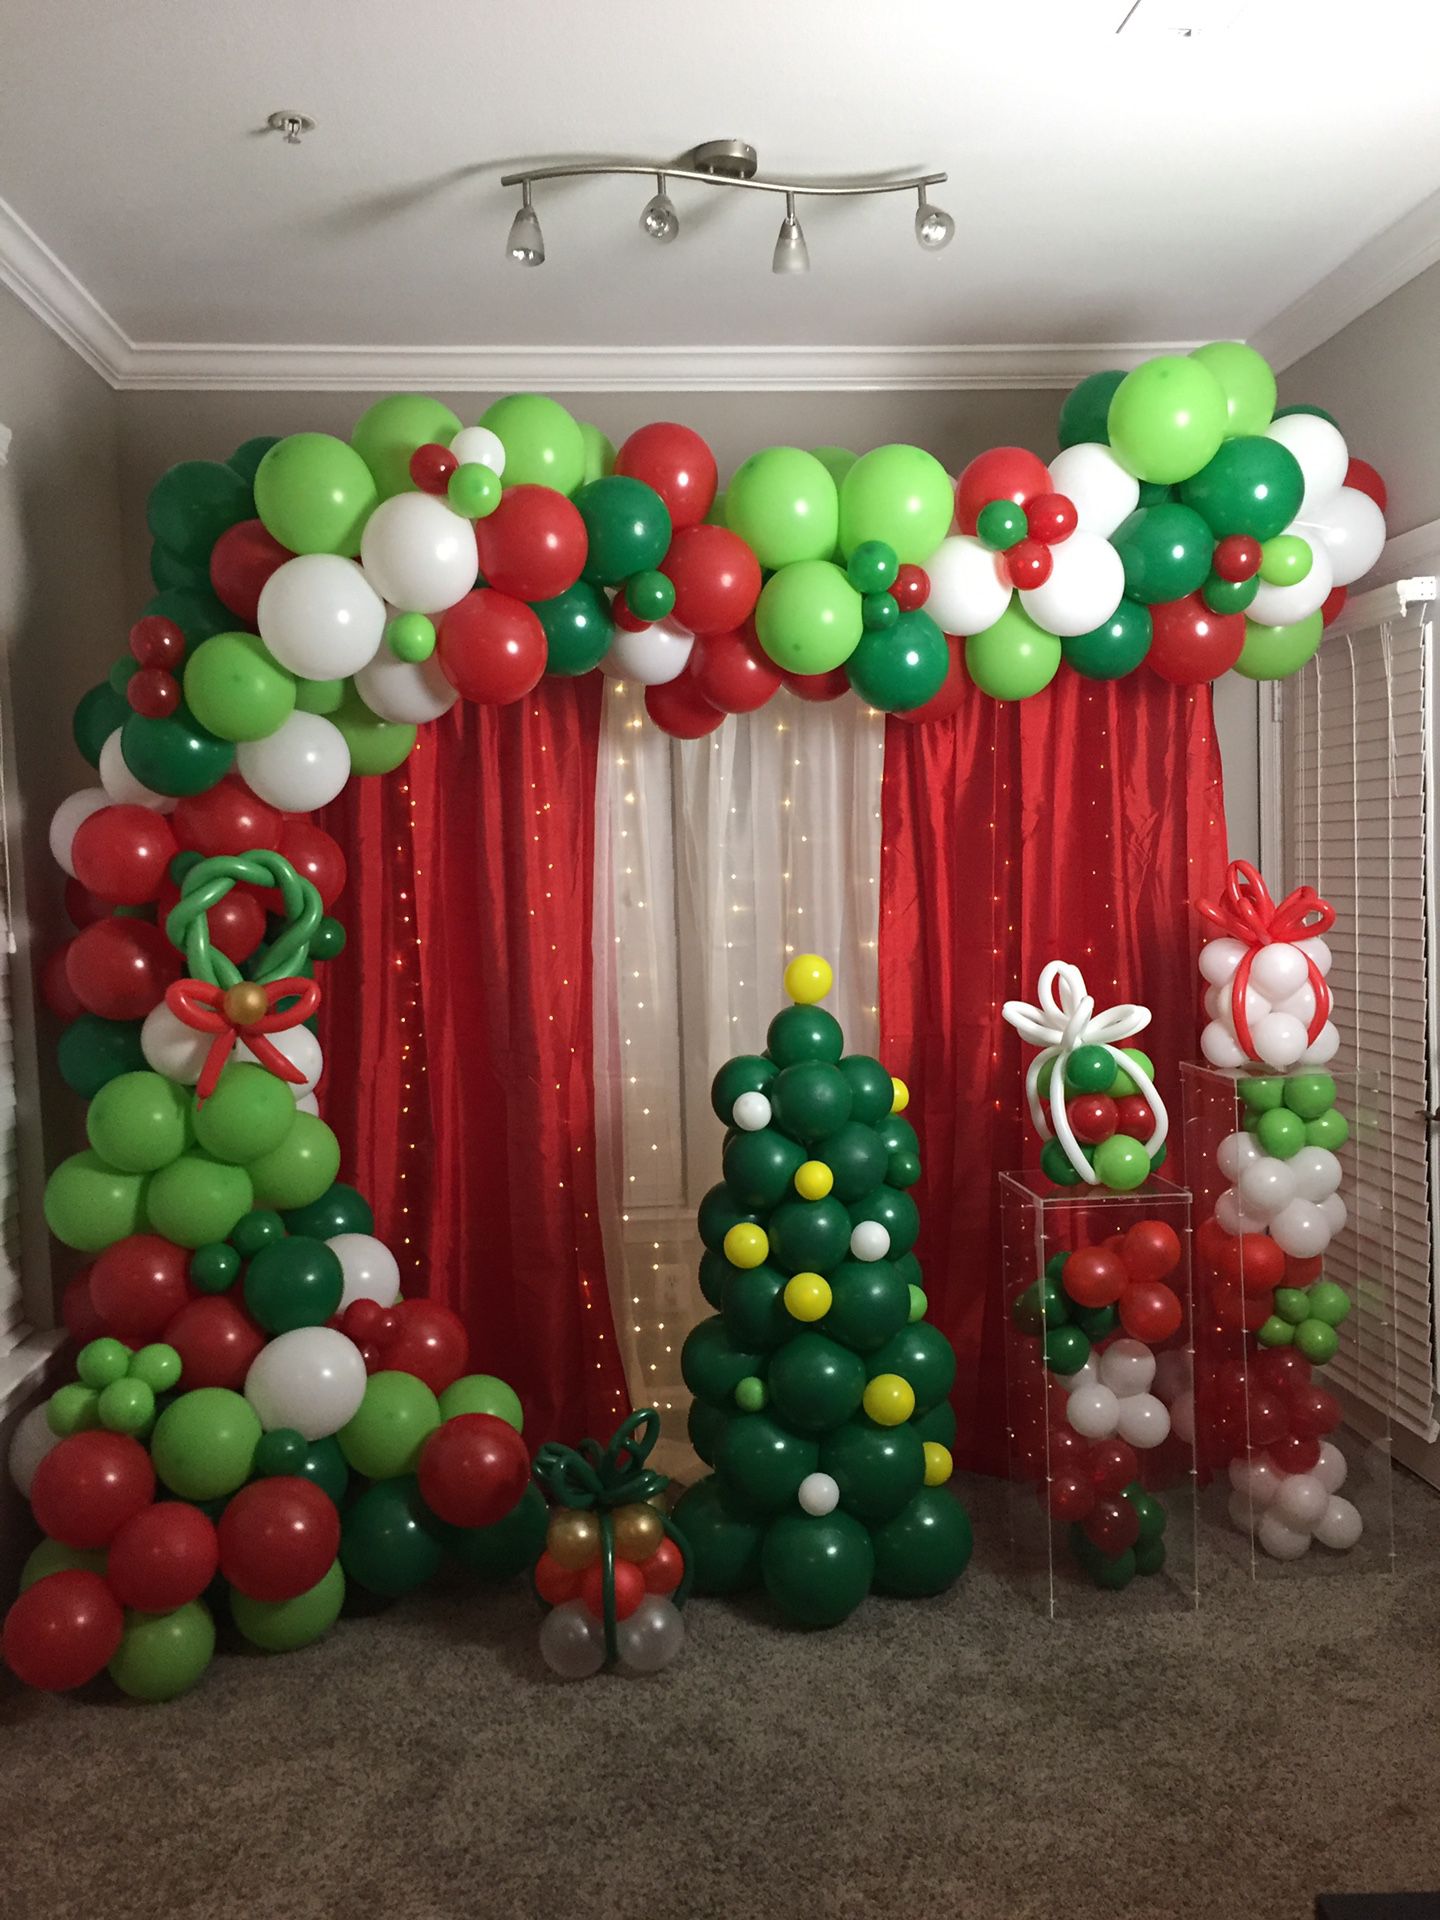 Balloon Decorations for all types of events